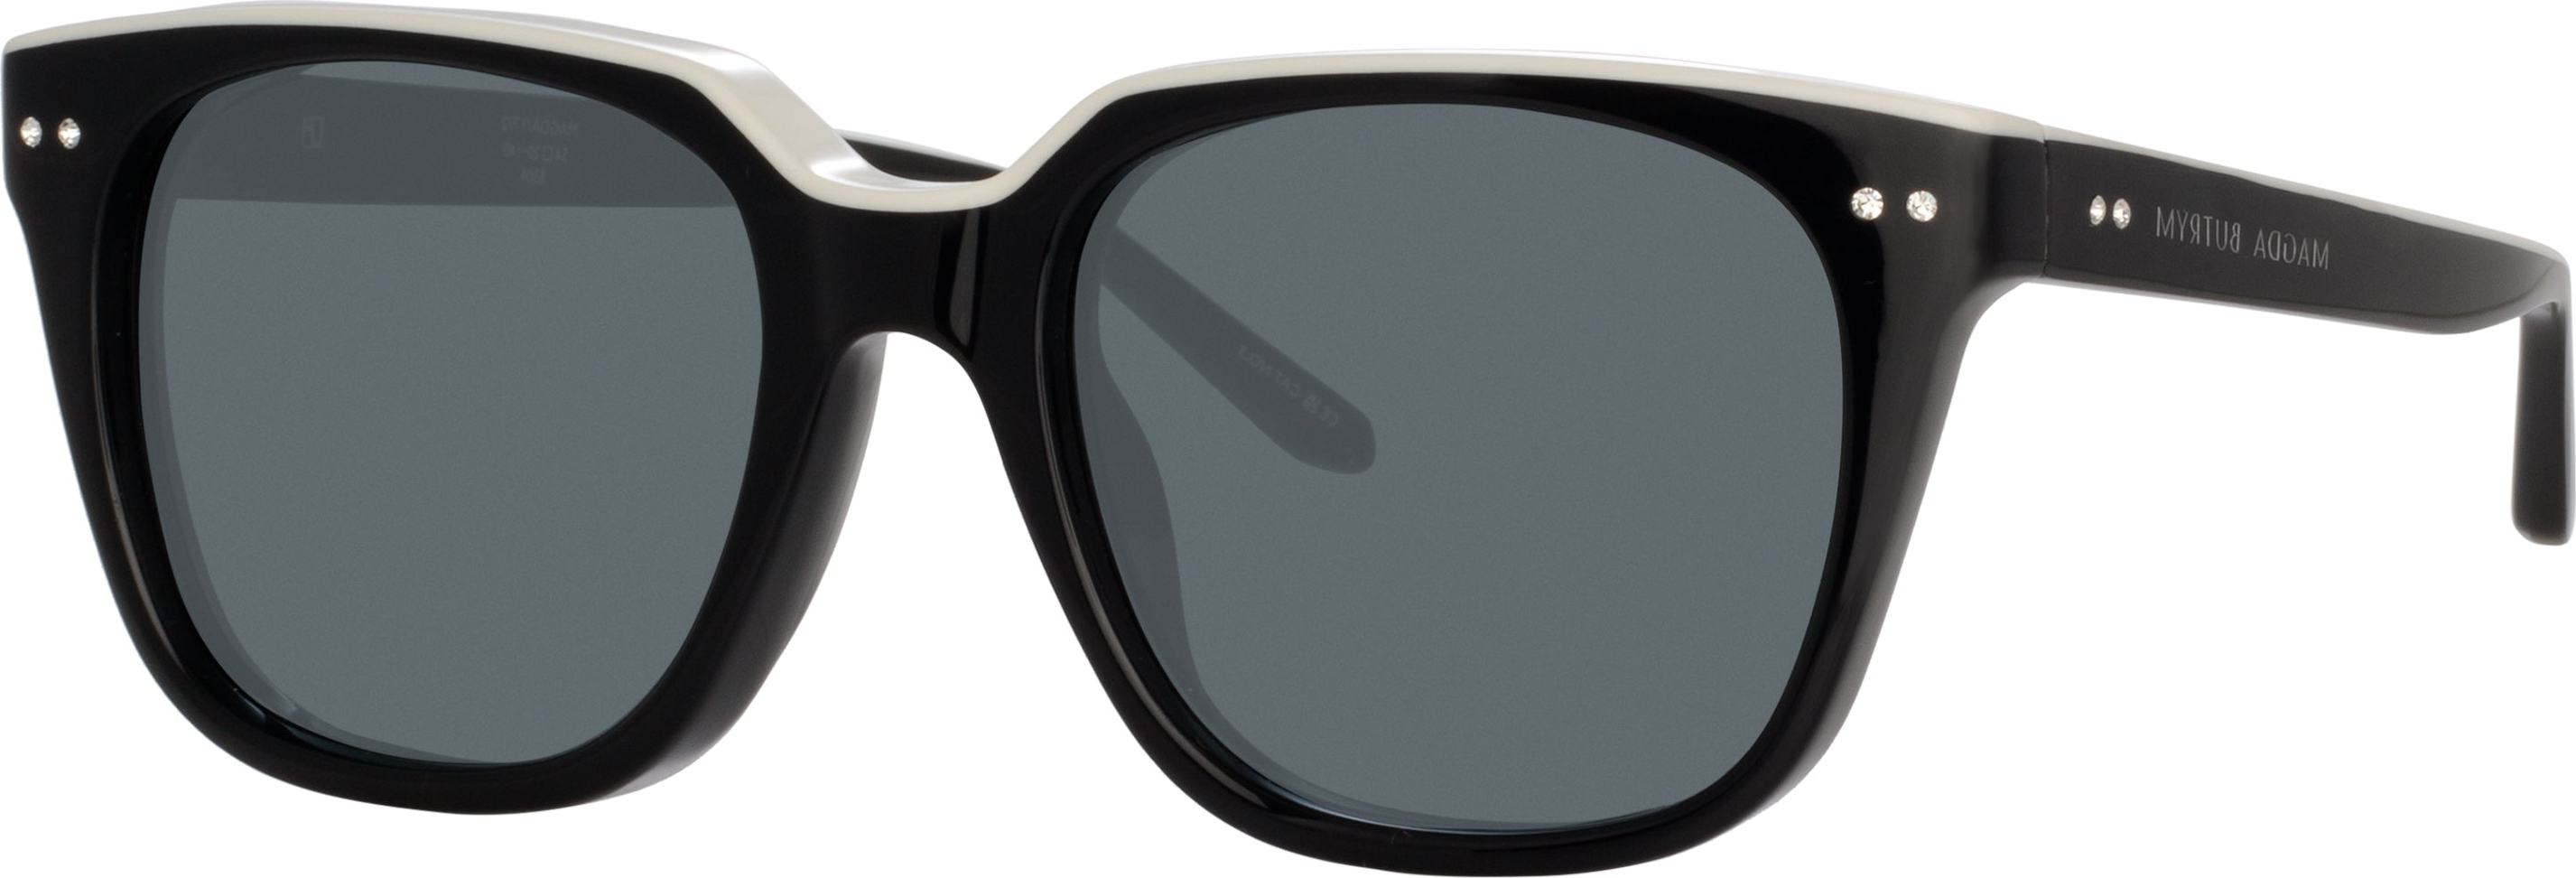 Color_MAGDA17C2SUN - Magda Butrym D-Frame Sunglasses in Black and White